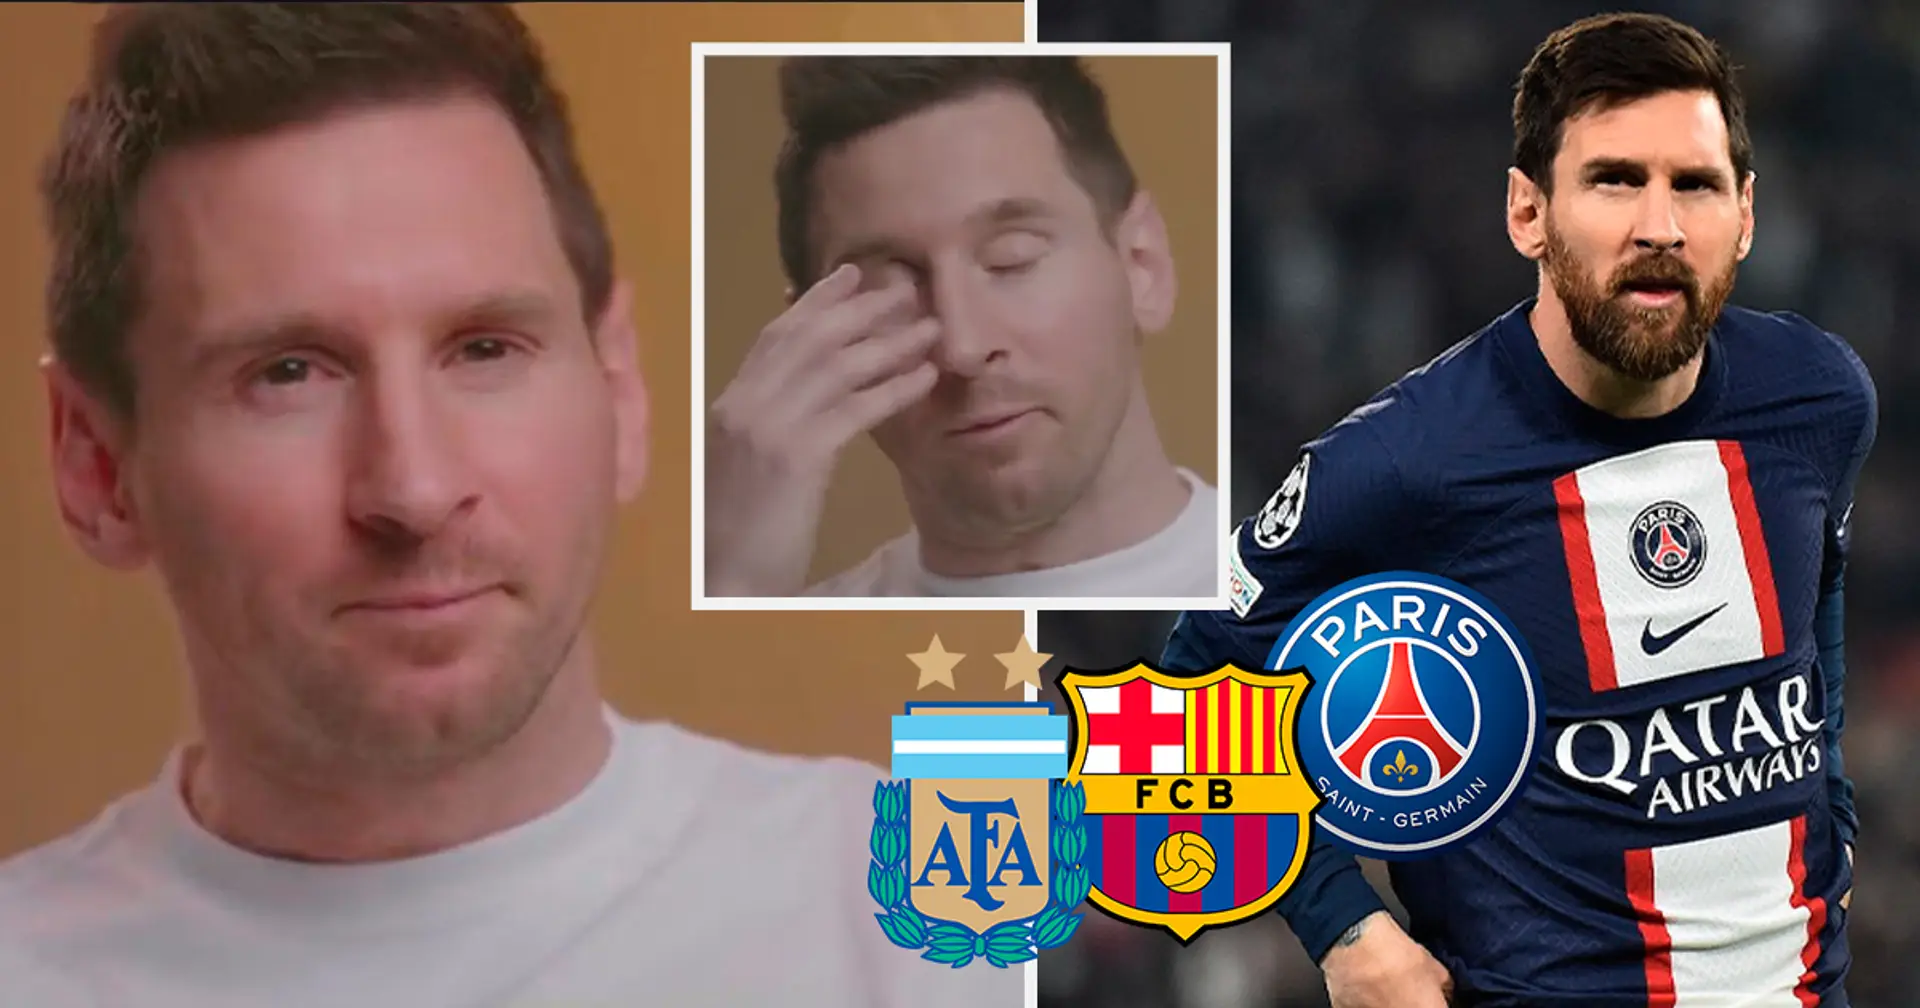 'The most beautiful thing that happened to me': Messi breaks down in tears as reveals the most beautiful moment of his career